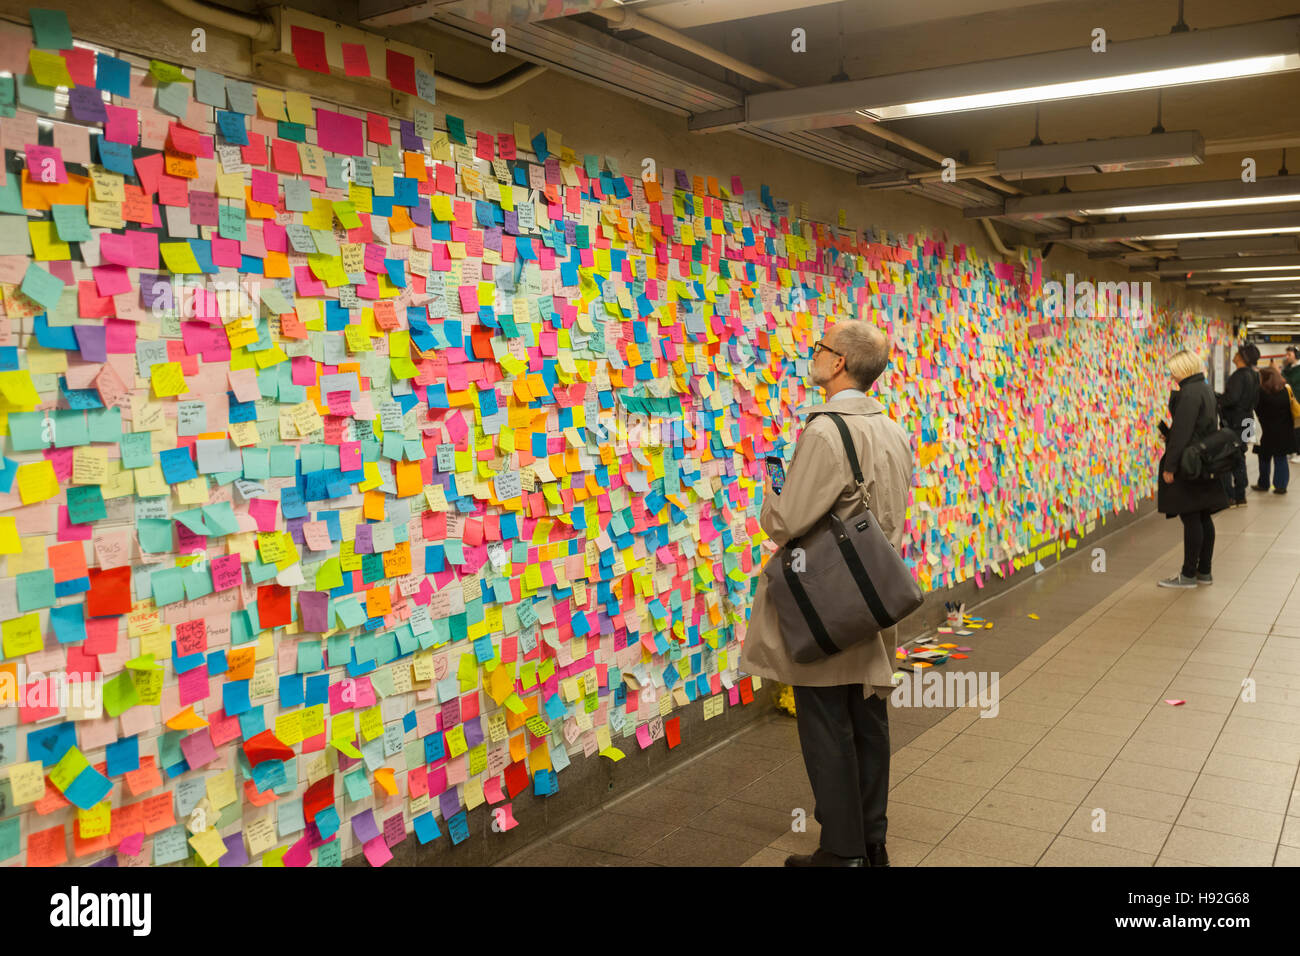 Thousands of travelers write their thoughts about the results of the presidential election on post-it notes in the Union Square subway station in New York, seen on Wednesday, November 16, 2016. Many wrote angry messages and some wrote messages of hope and some now felt they were not alone and part of a community. (© Richard B. Levine) Stock Photo